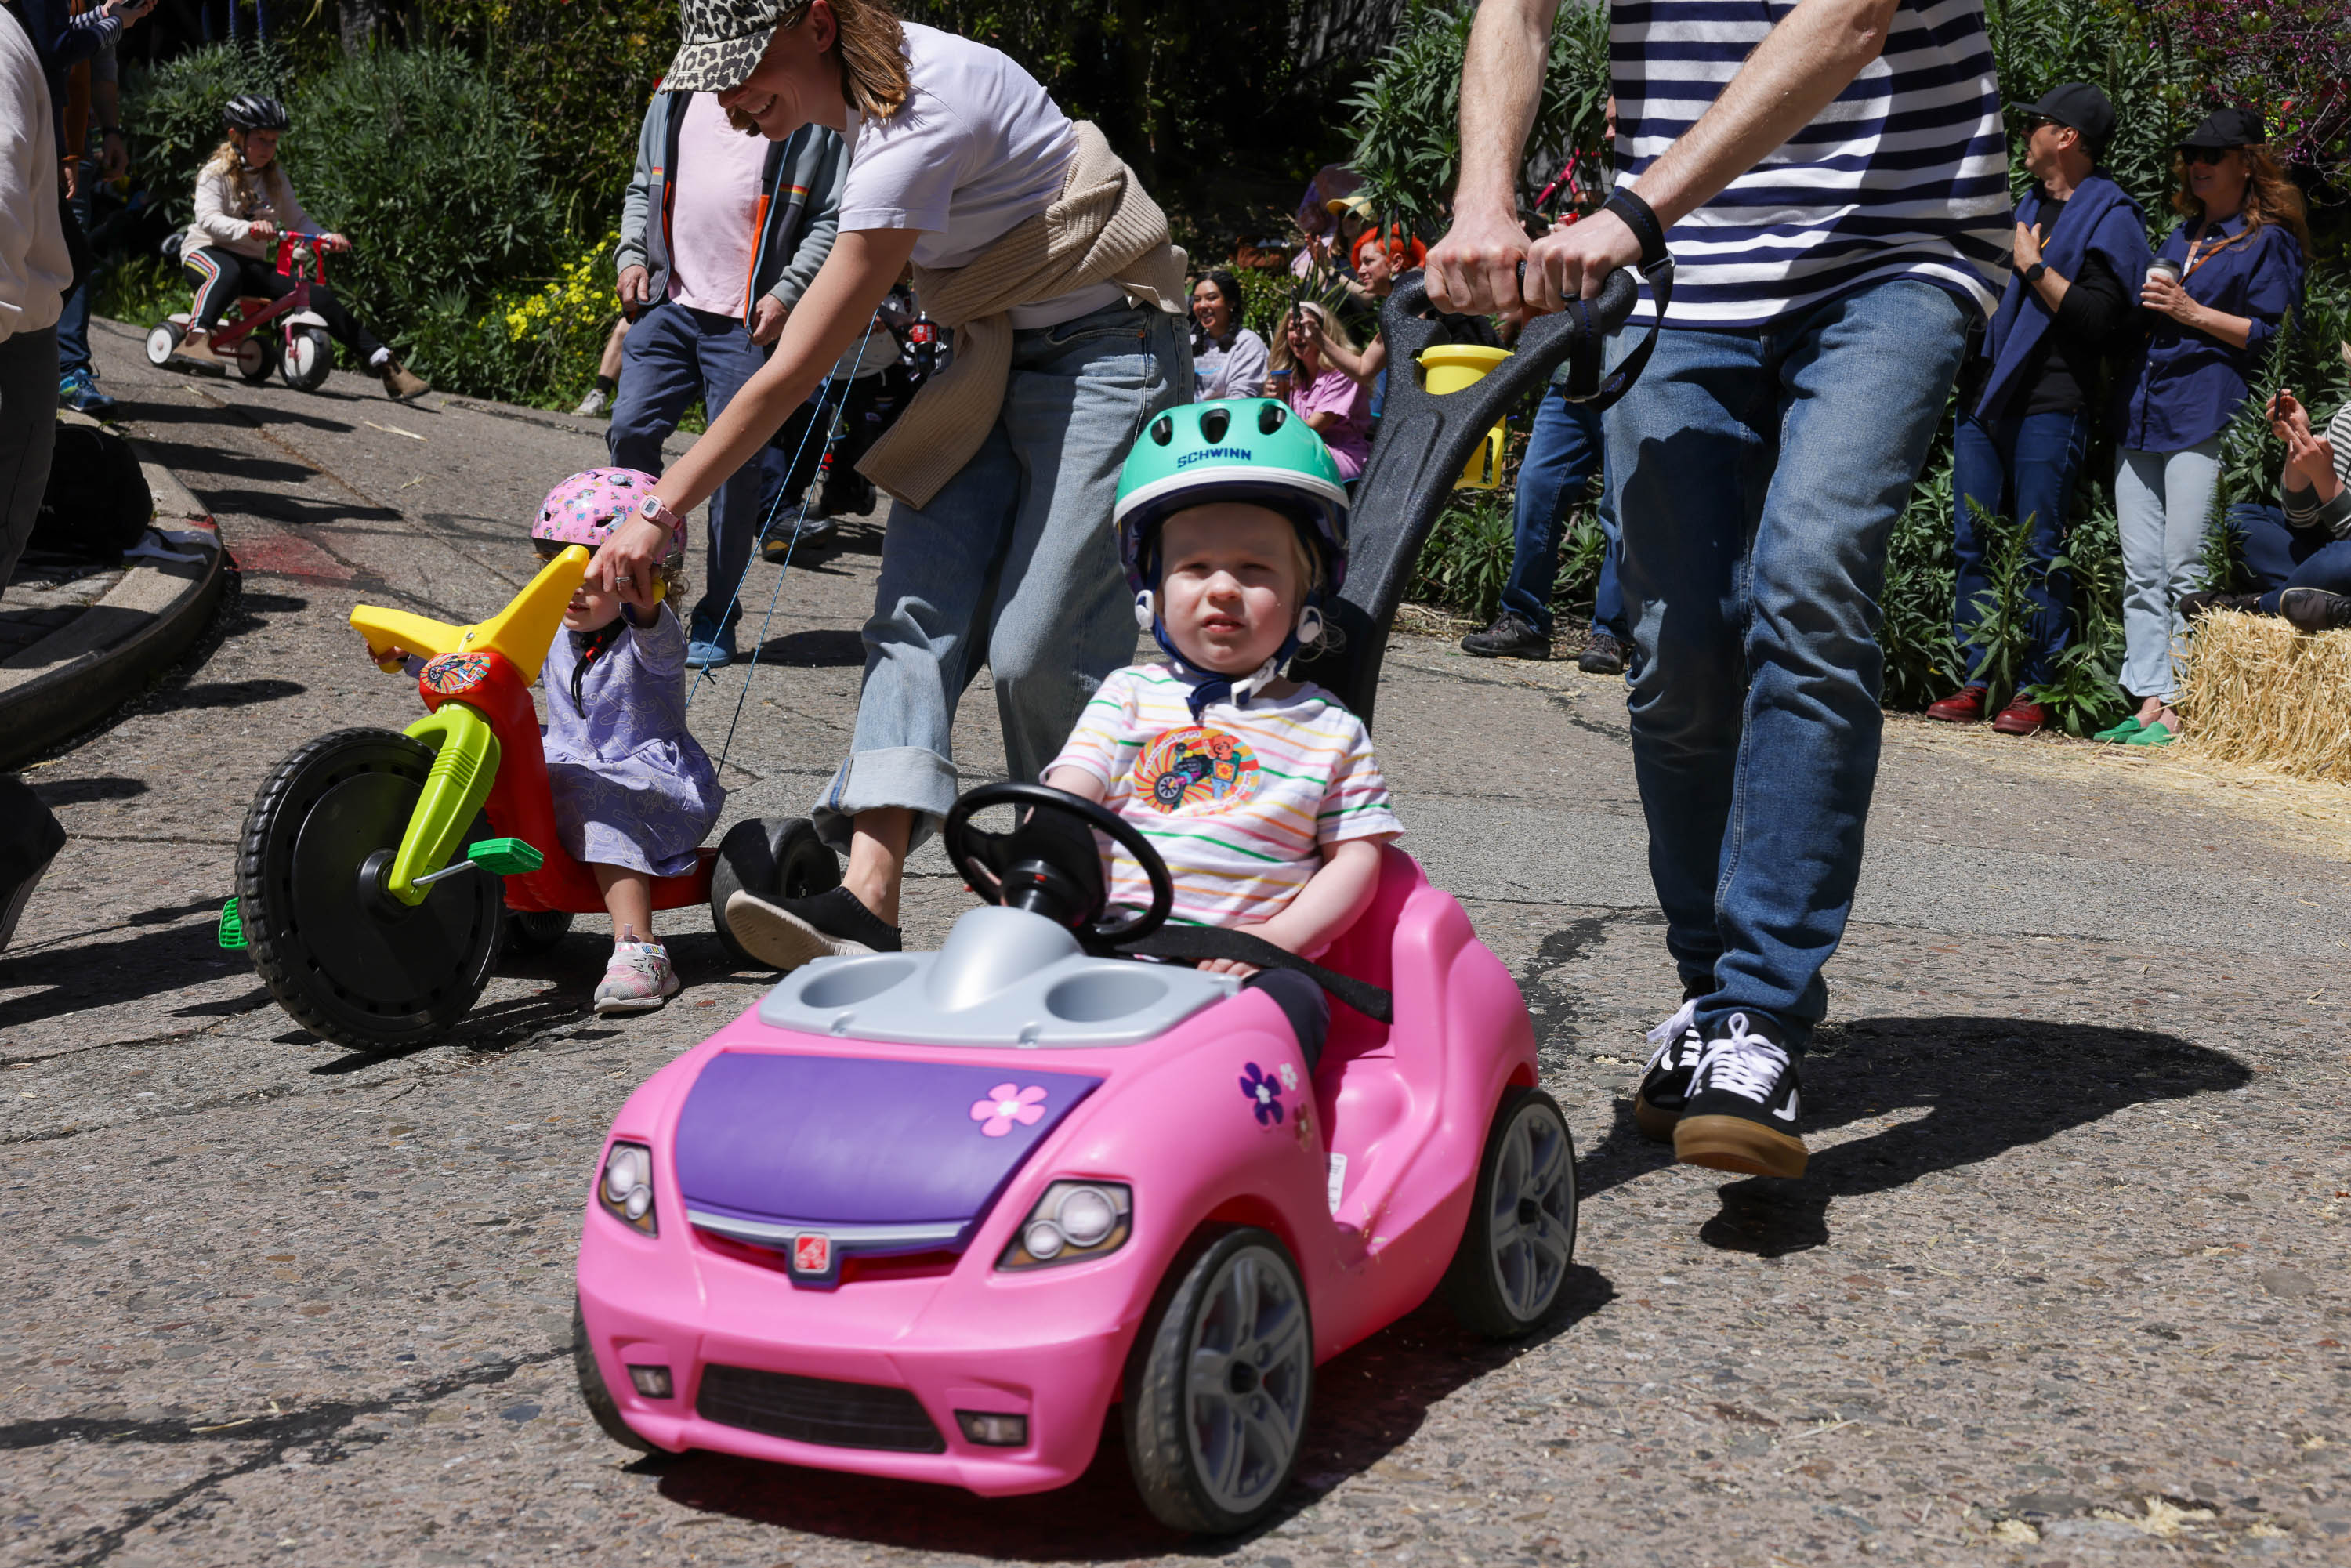 A toddler in a green helmet rides in a pink toy car, pushed by an adult, in a sunny outdoor setting with spectators.